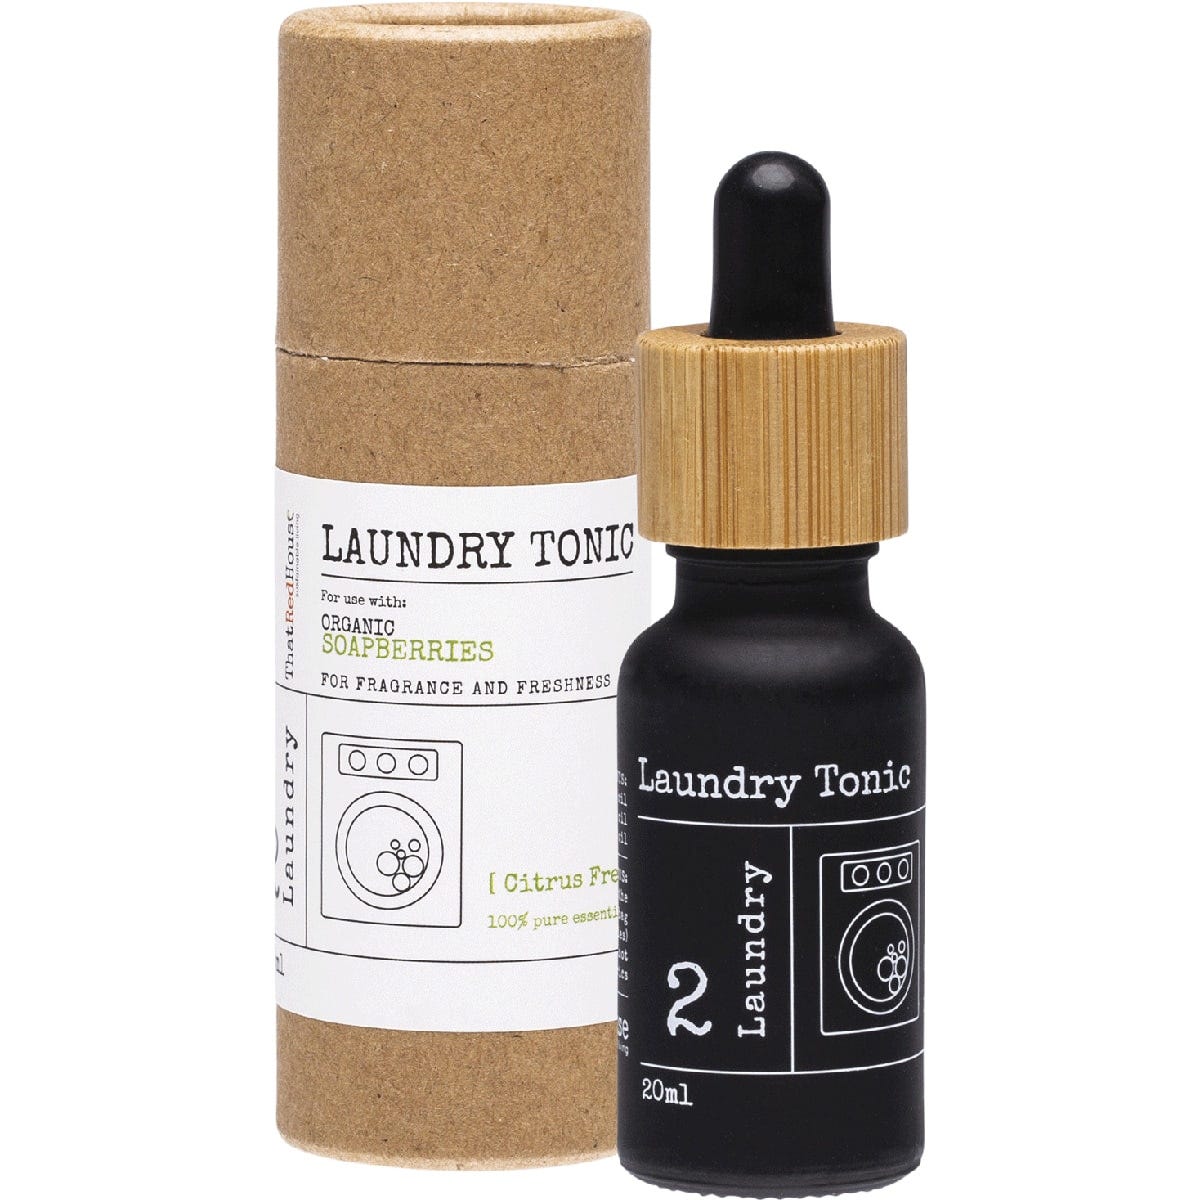 That Red House Laundry Tonic Citrus Fresh 20ml - Dr Earth - Cleaning